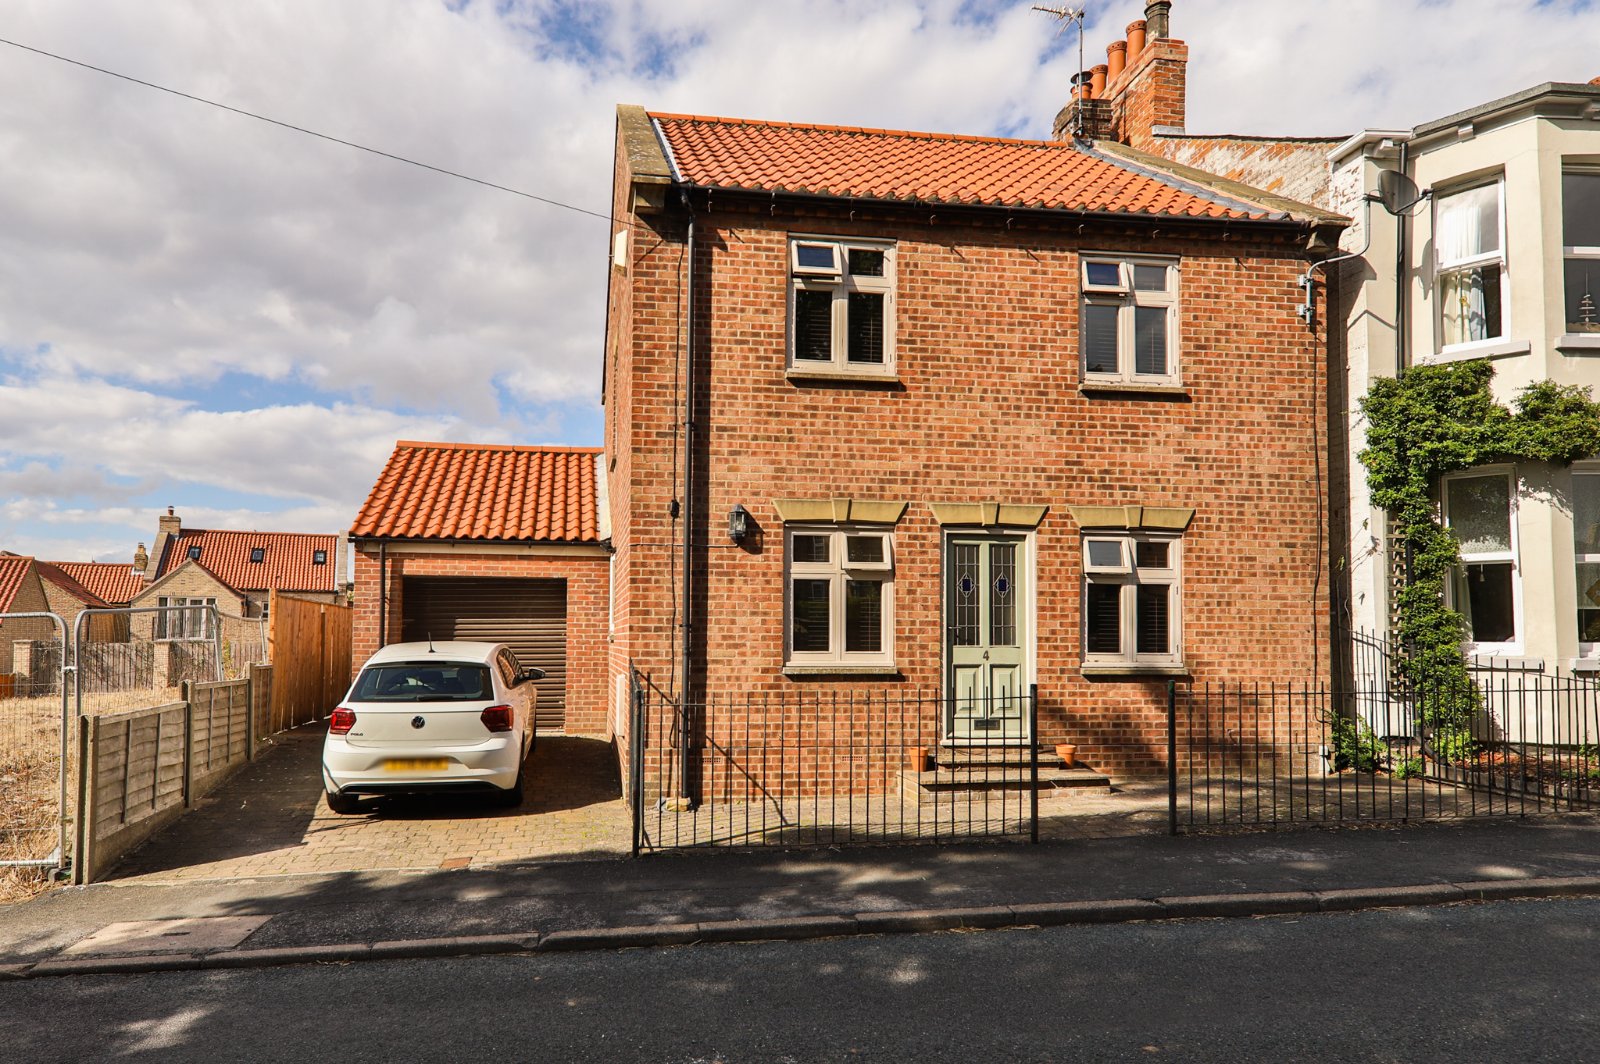 3 bed house for sale in Ratten Row, North Newbald, YO43